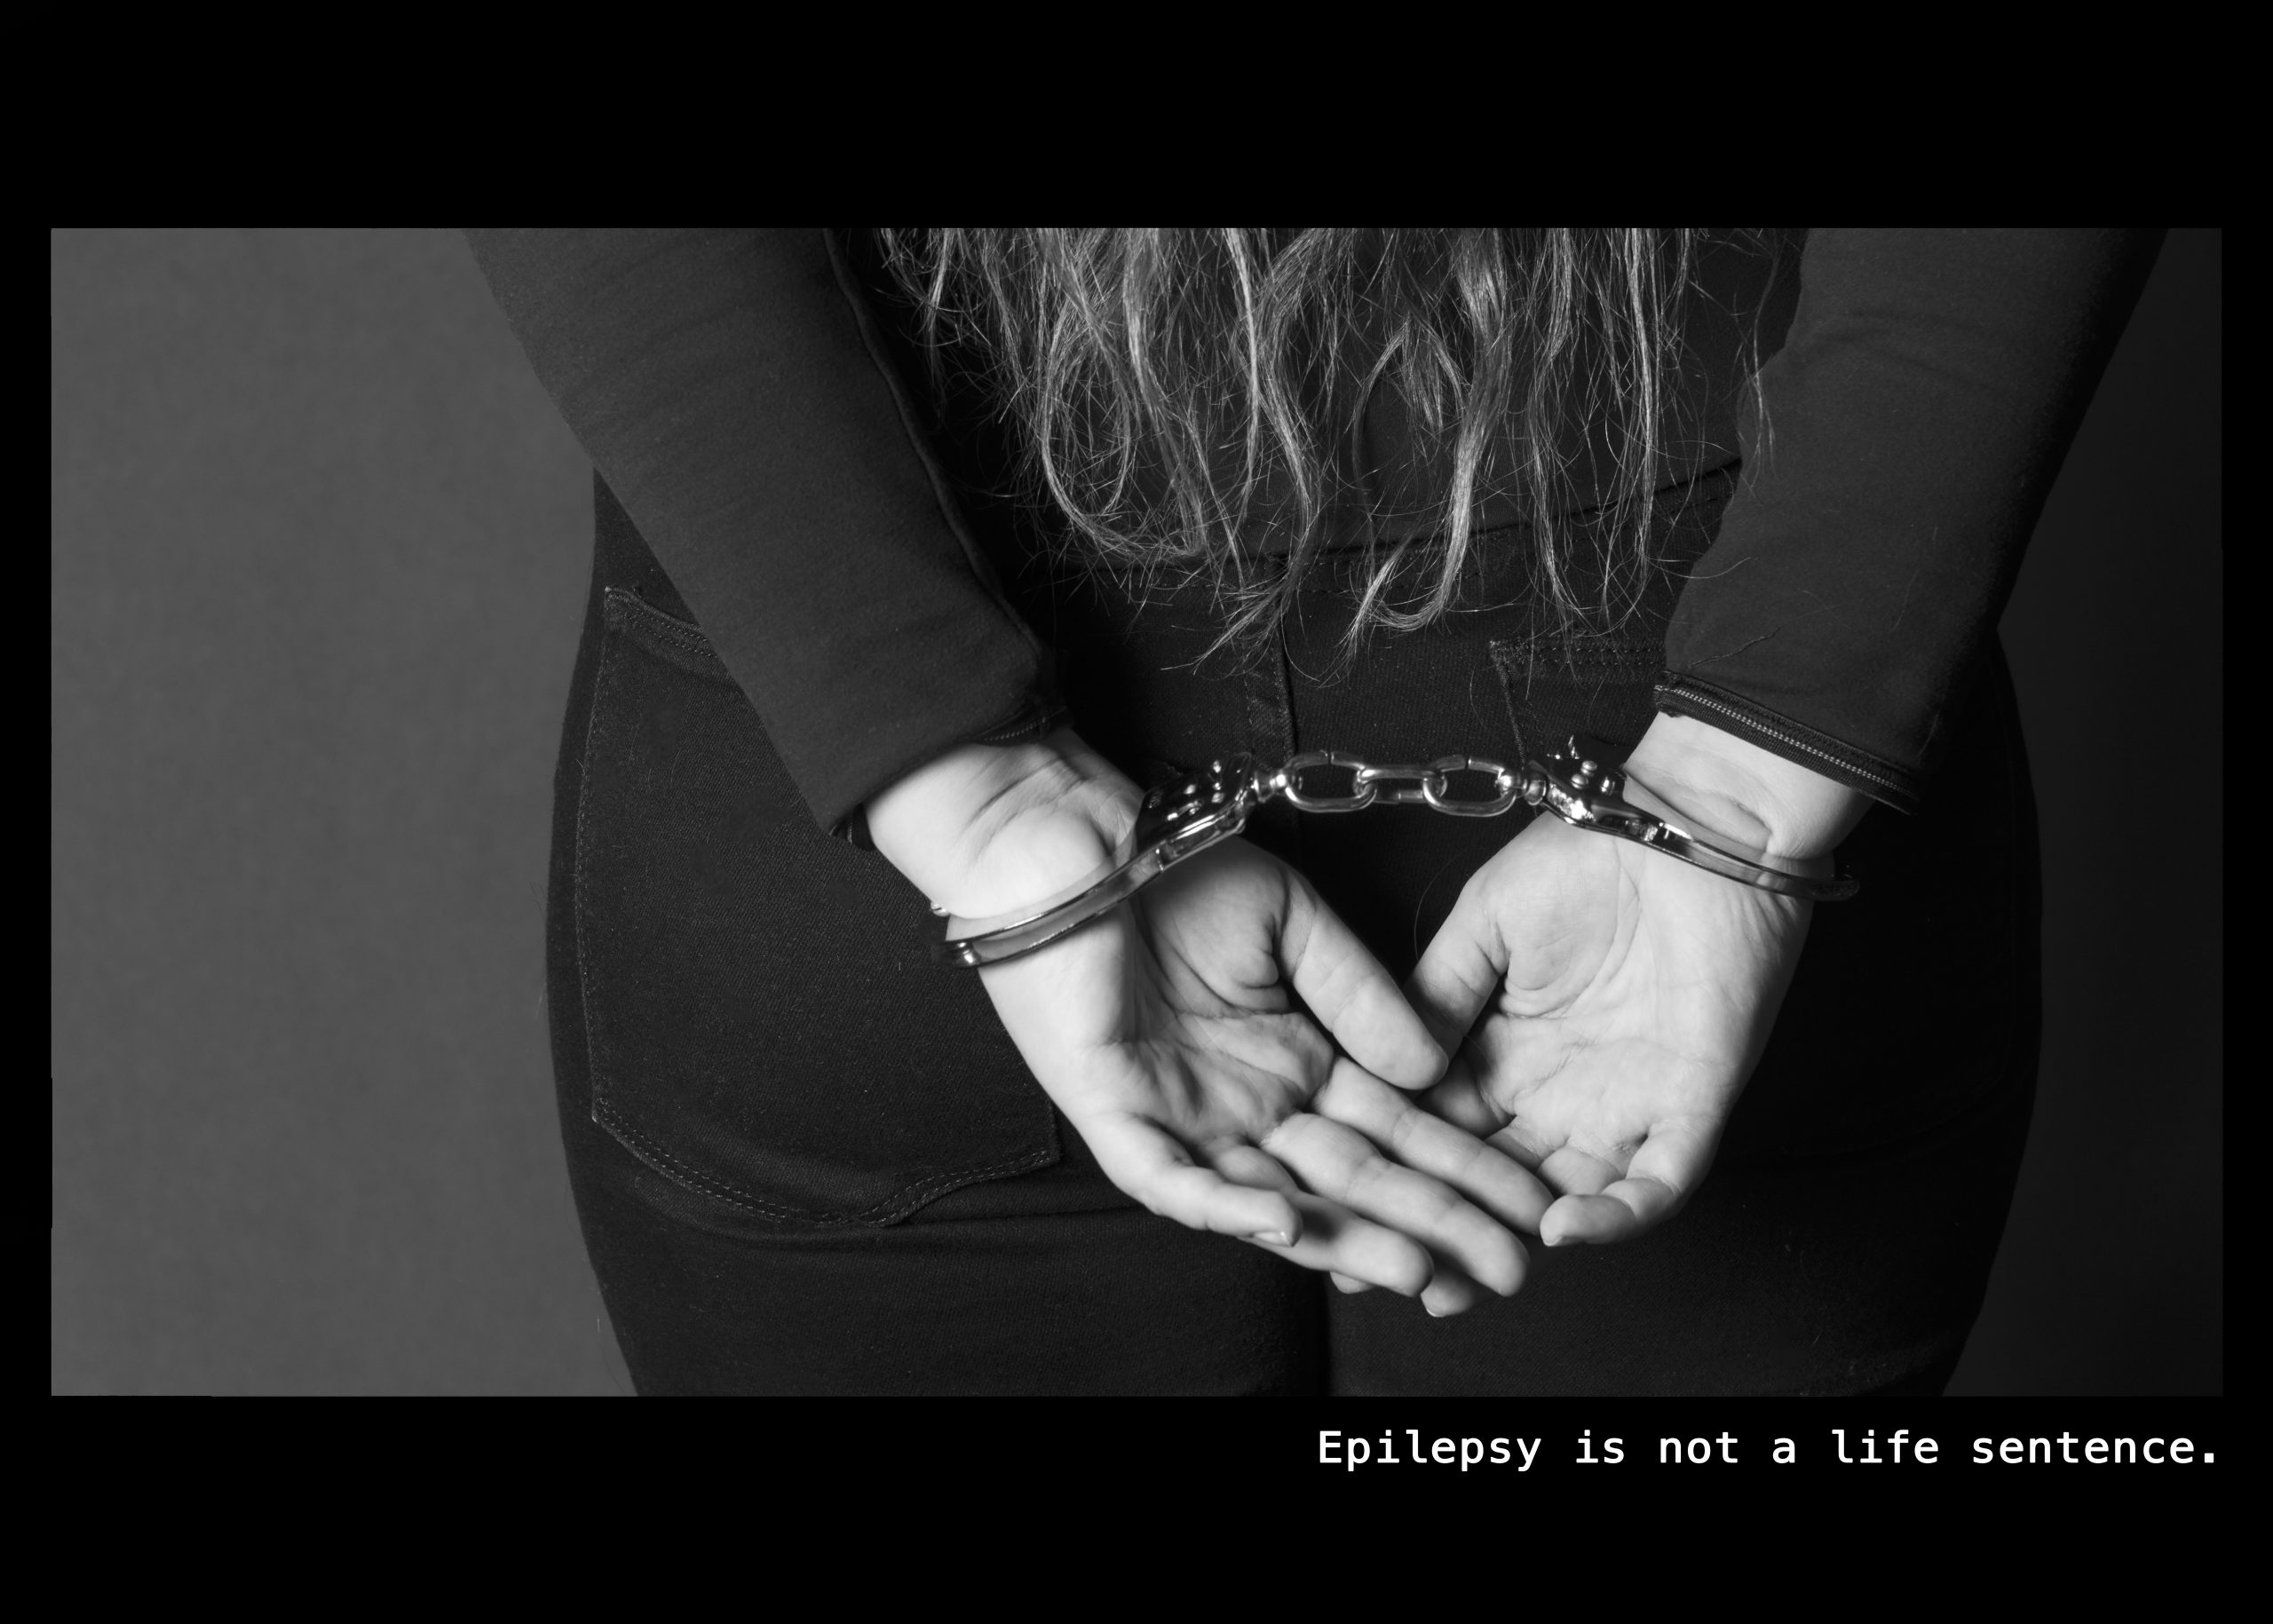 Image of a woman handcuffed with her hands behind her back. Text: Epilepsy is not a life sentence.